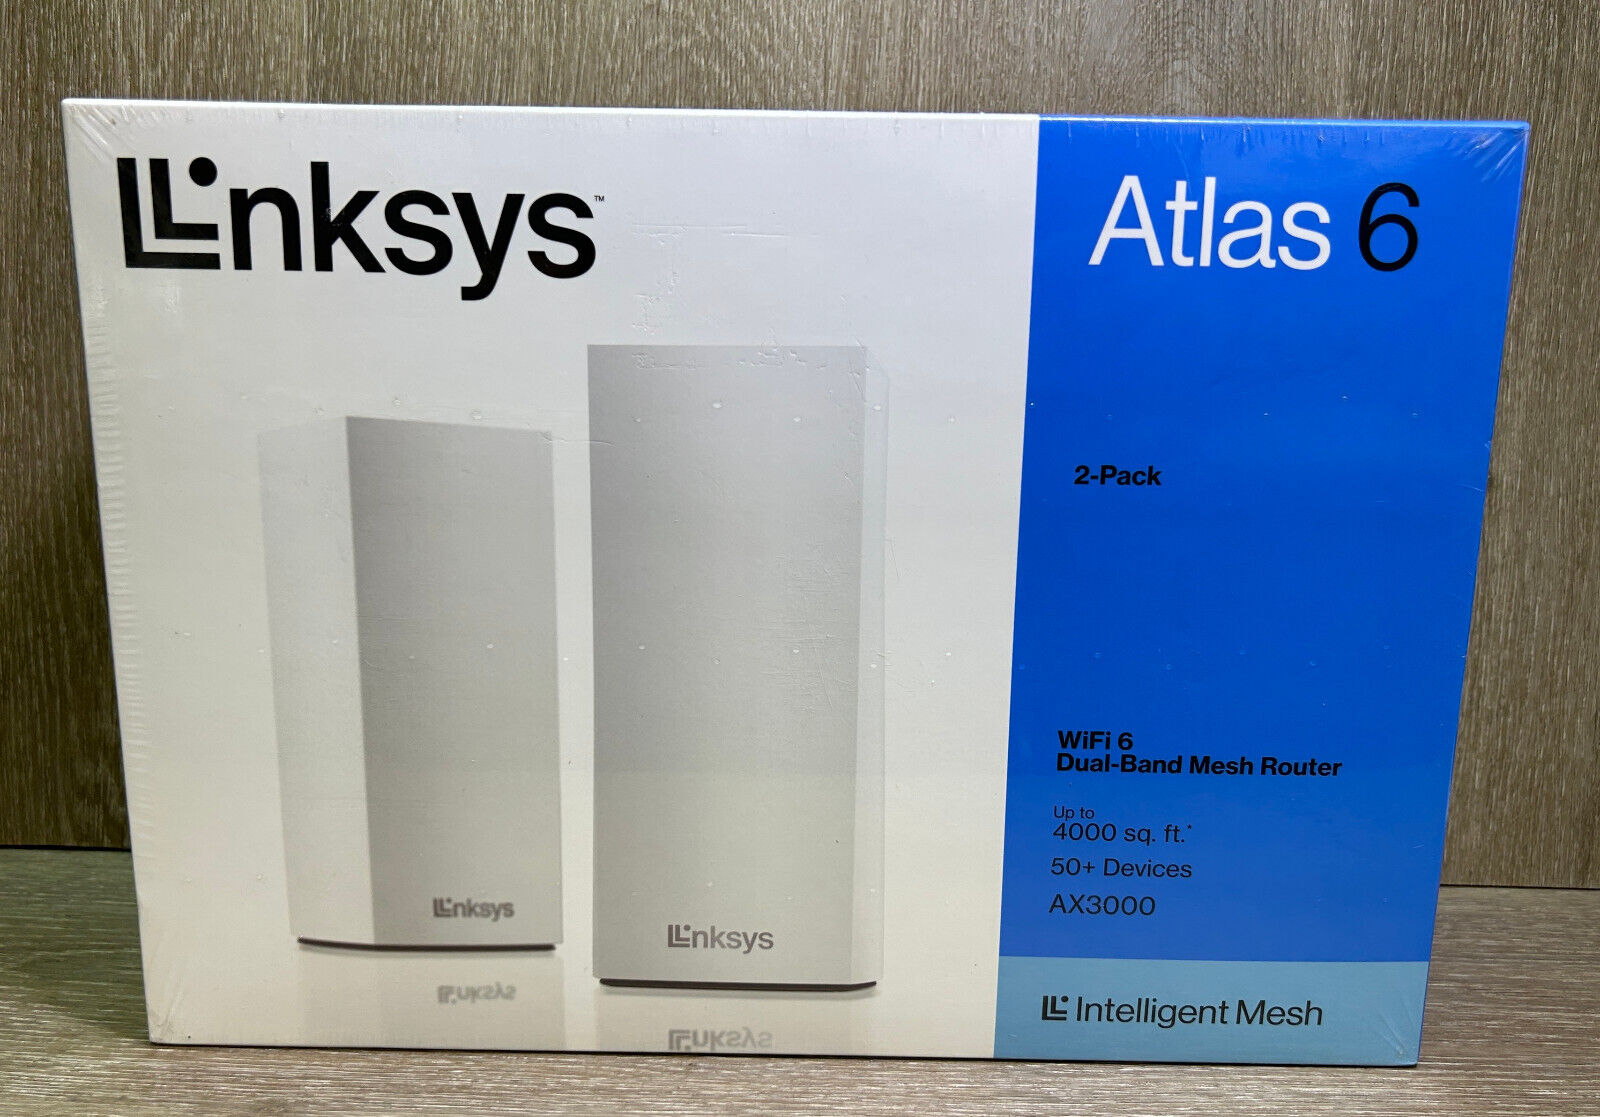 Linksys Atlas 6 WiFi 6 Router AX3000 Dual-Band WiFi Mesh Wireless Router - New